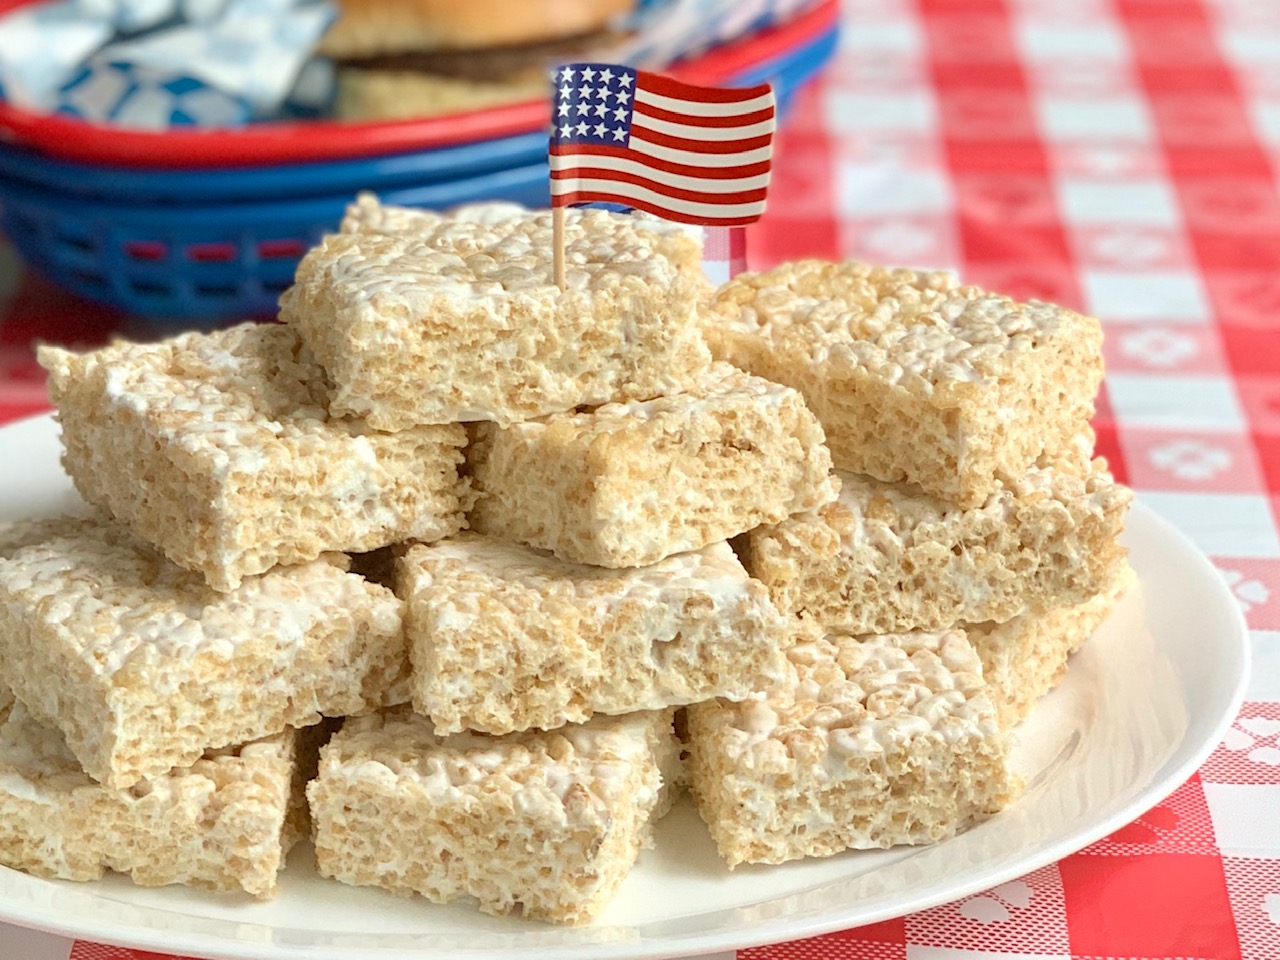 A serving plate full of stacked rice krispie squares.